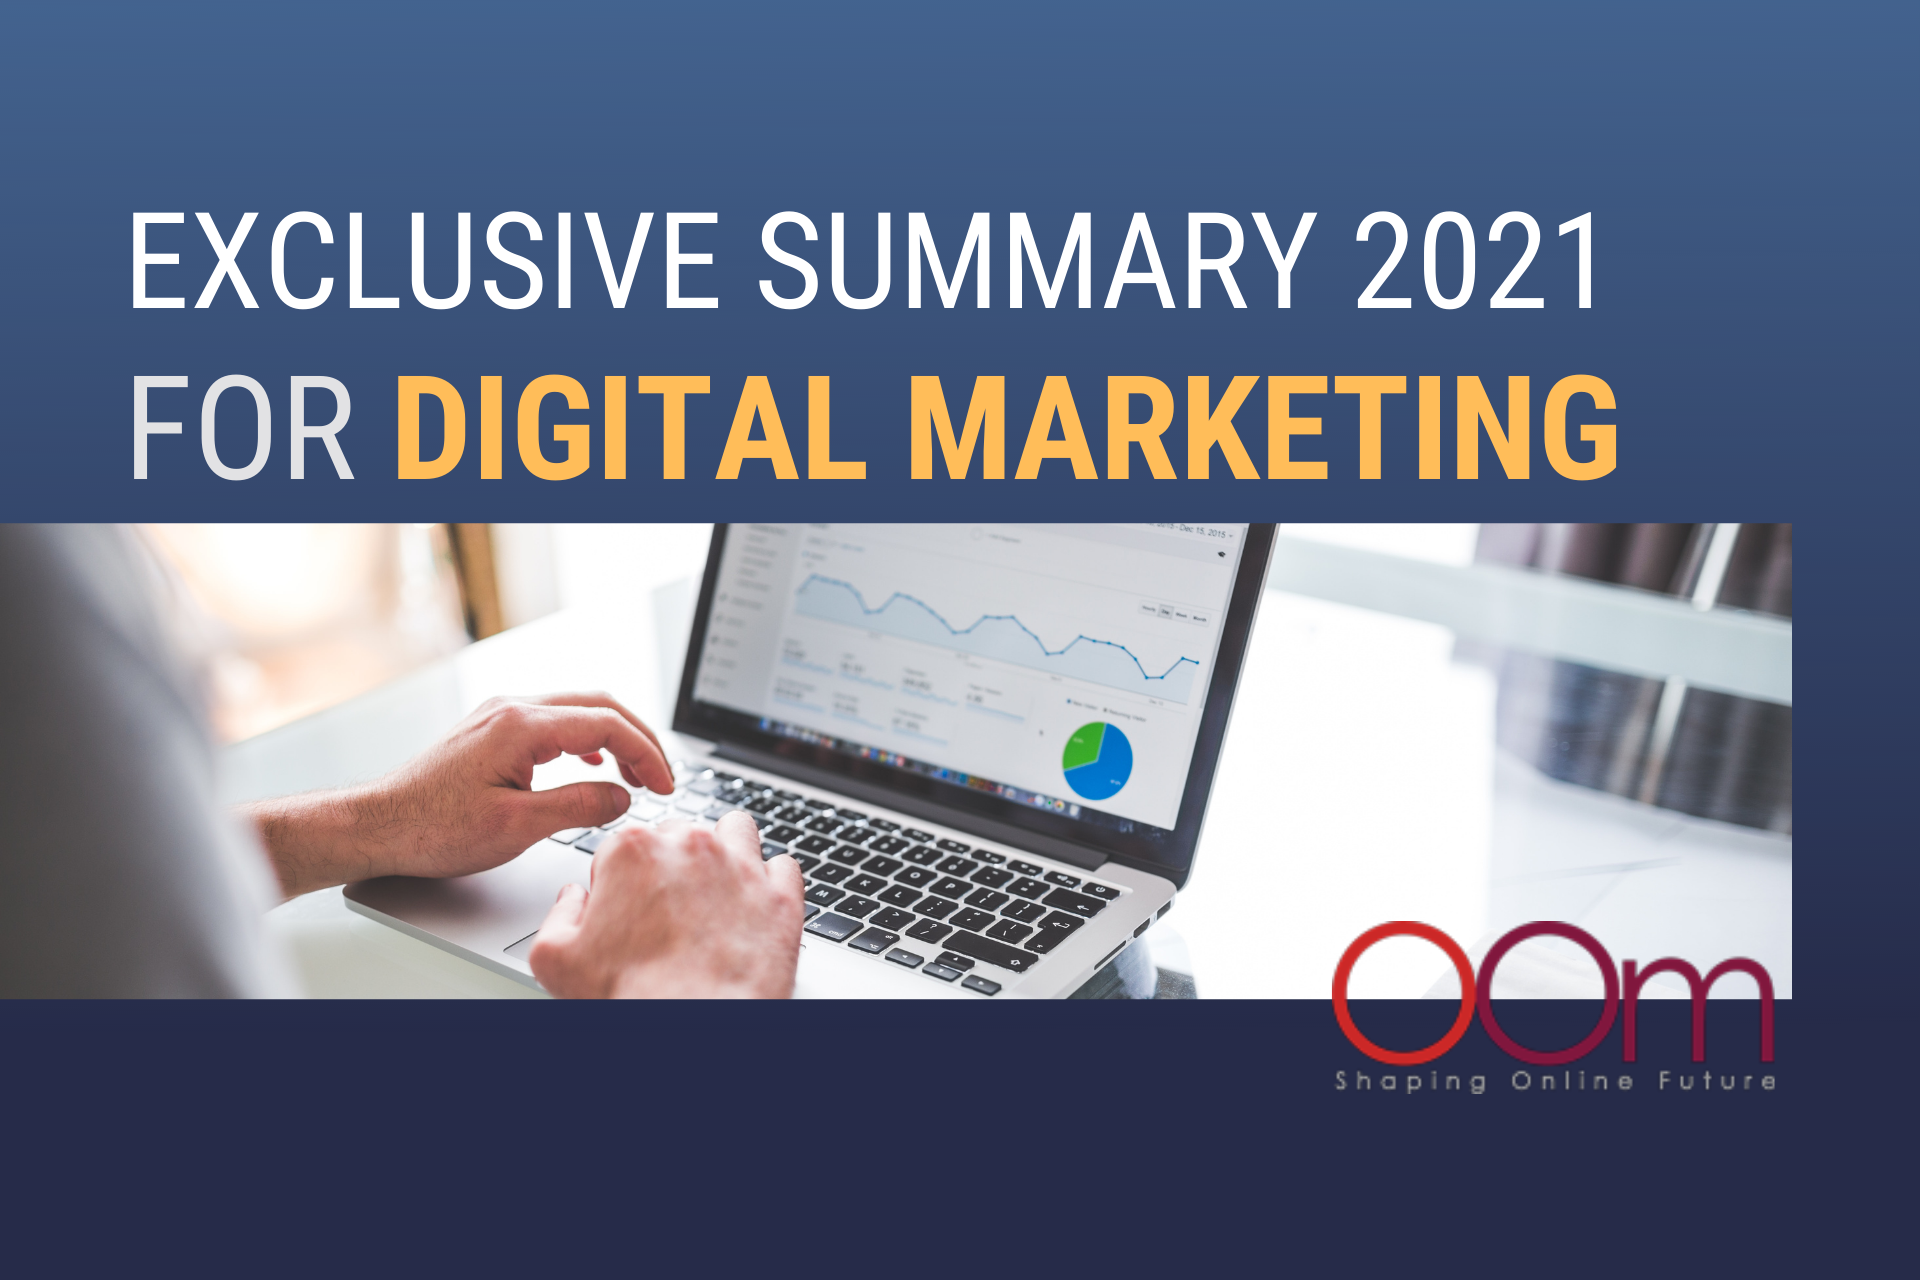 Exclusive Summary 2021 for Digital Marketing